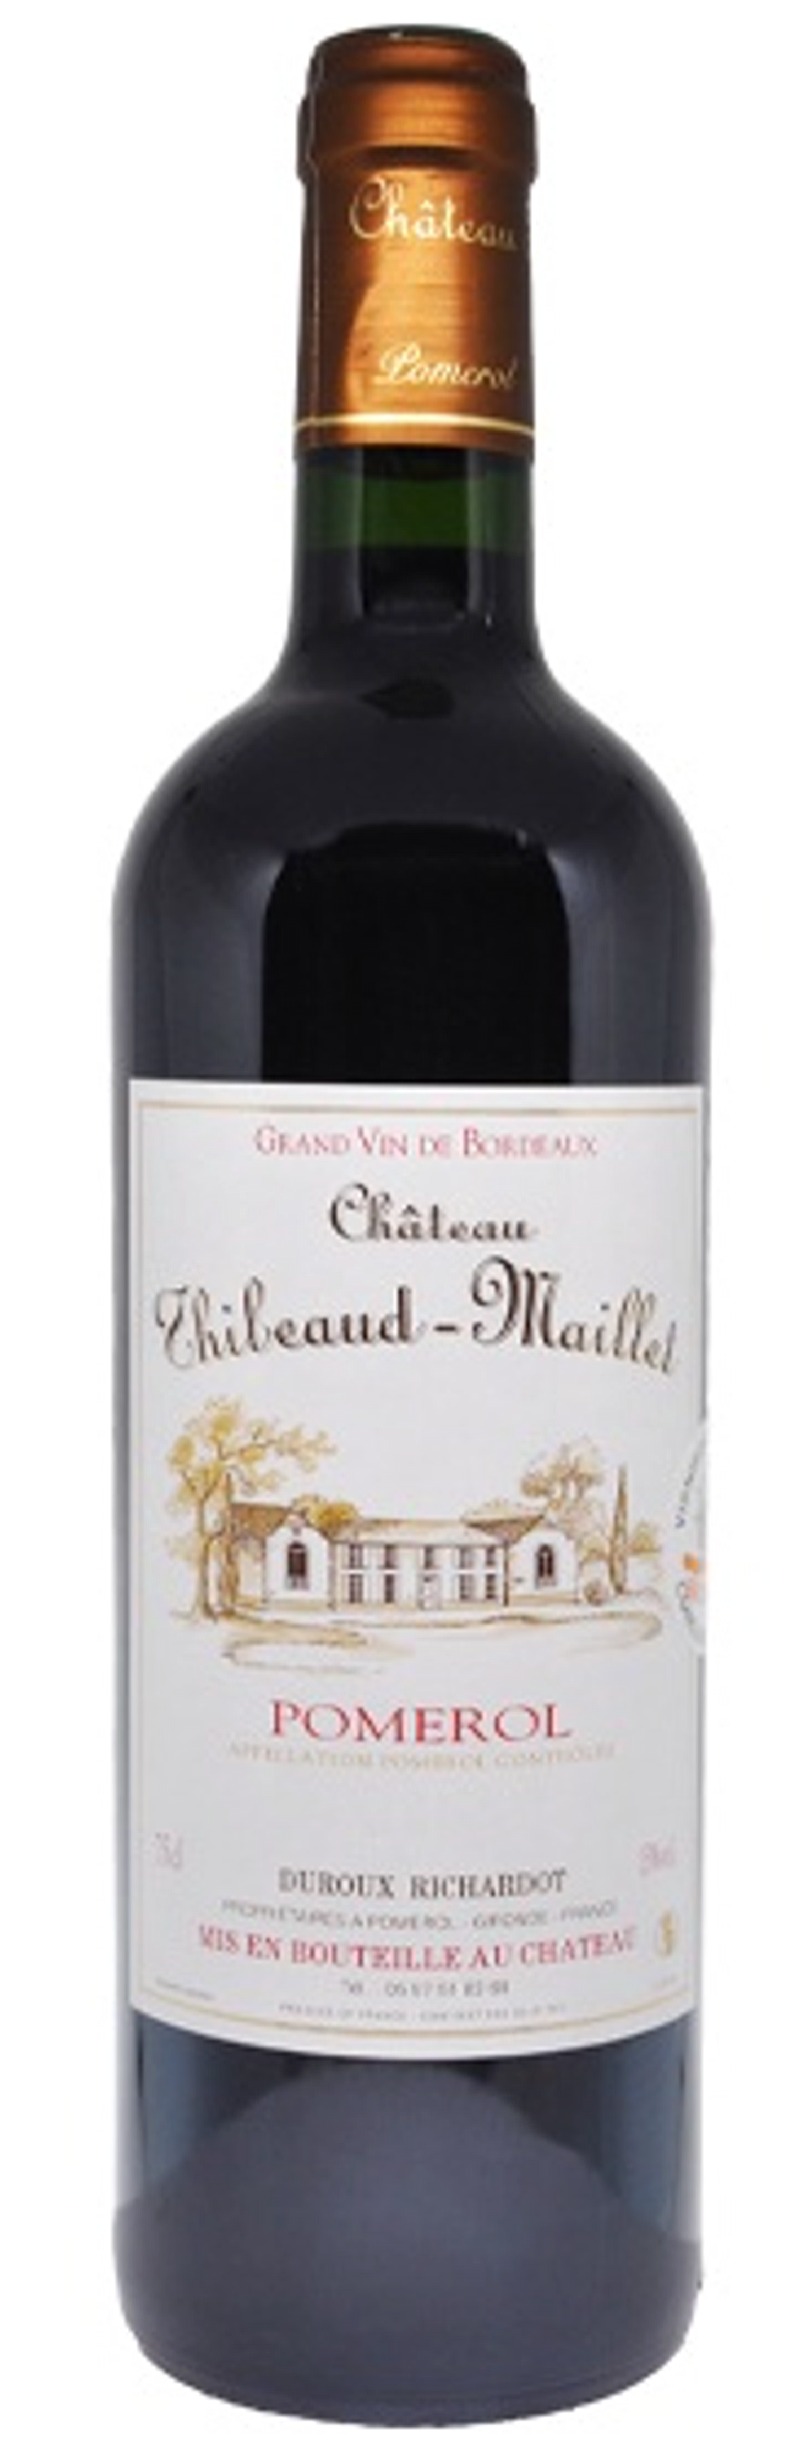 Thibeaud-Maillet Pomerol 2019 | Timeless Wines - Order Wine Online from the  United States - California Wines - French Wines - Spanish Wines -  Chardonnay - Port - Cabernet Savignon